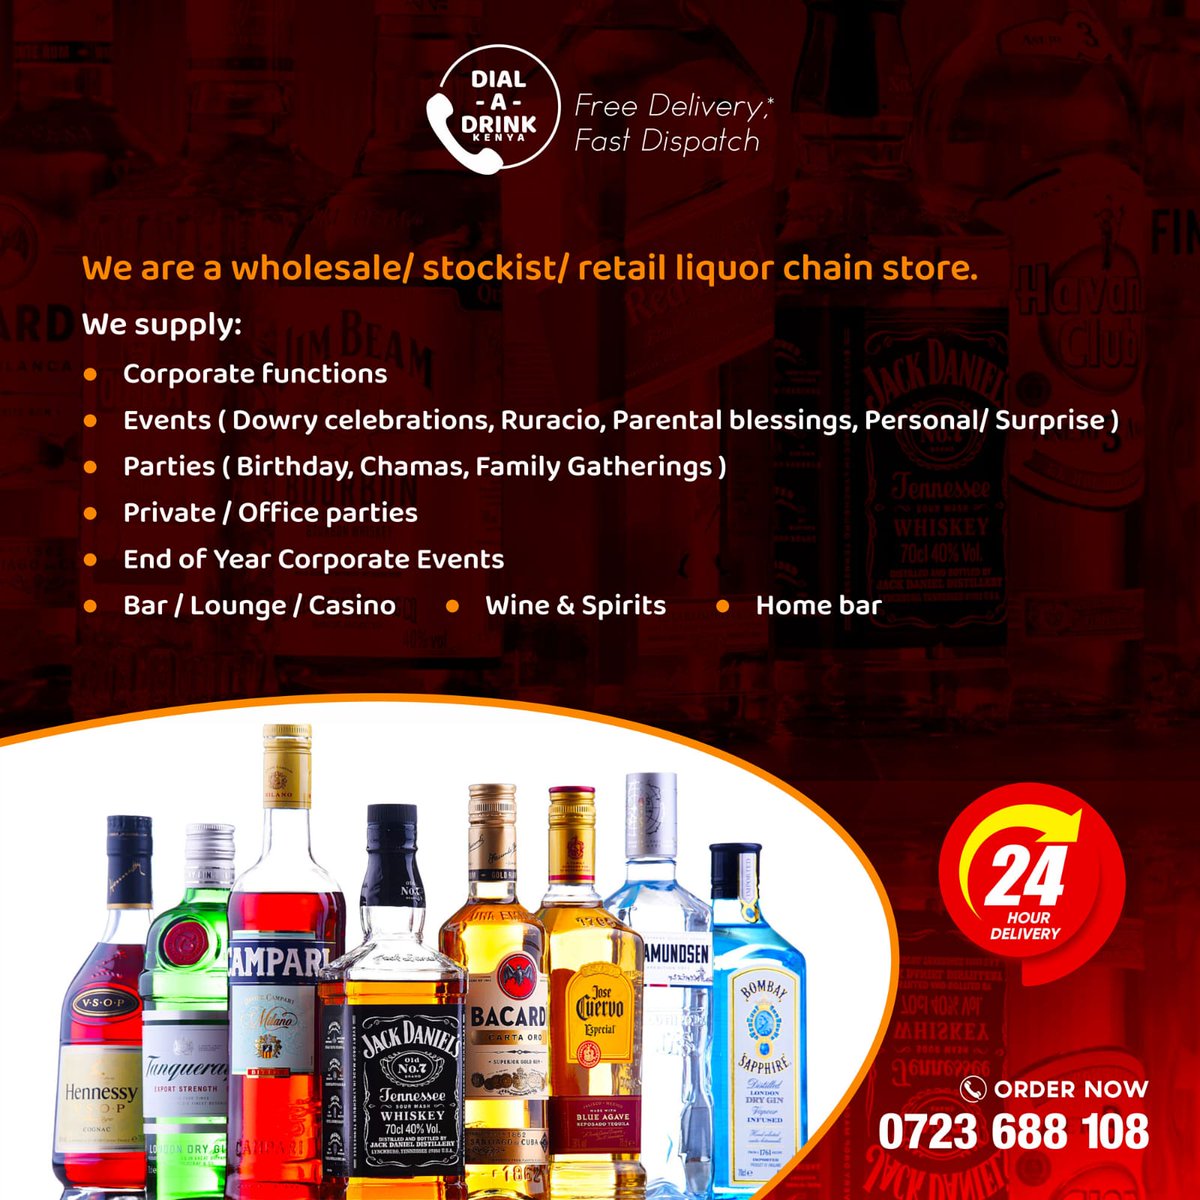 We got you sorted...😊
#drinks #drinksdelivery #dialadrinkkenya #wines #whisky #gin #rum #alcoholdelivery #party #share #freedelivery 
Dial +254723688108 for fast and free delivery within Nairobi and its environment or visit our website  dialadrinkkenya.com